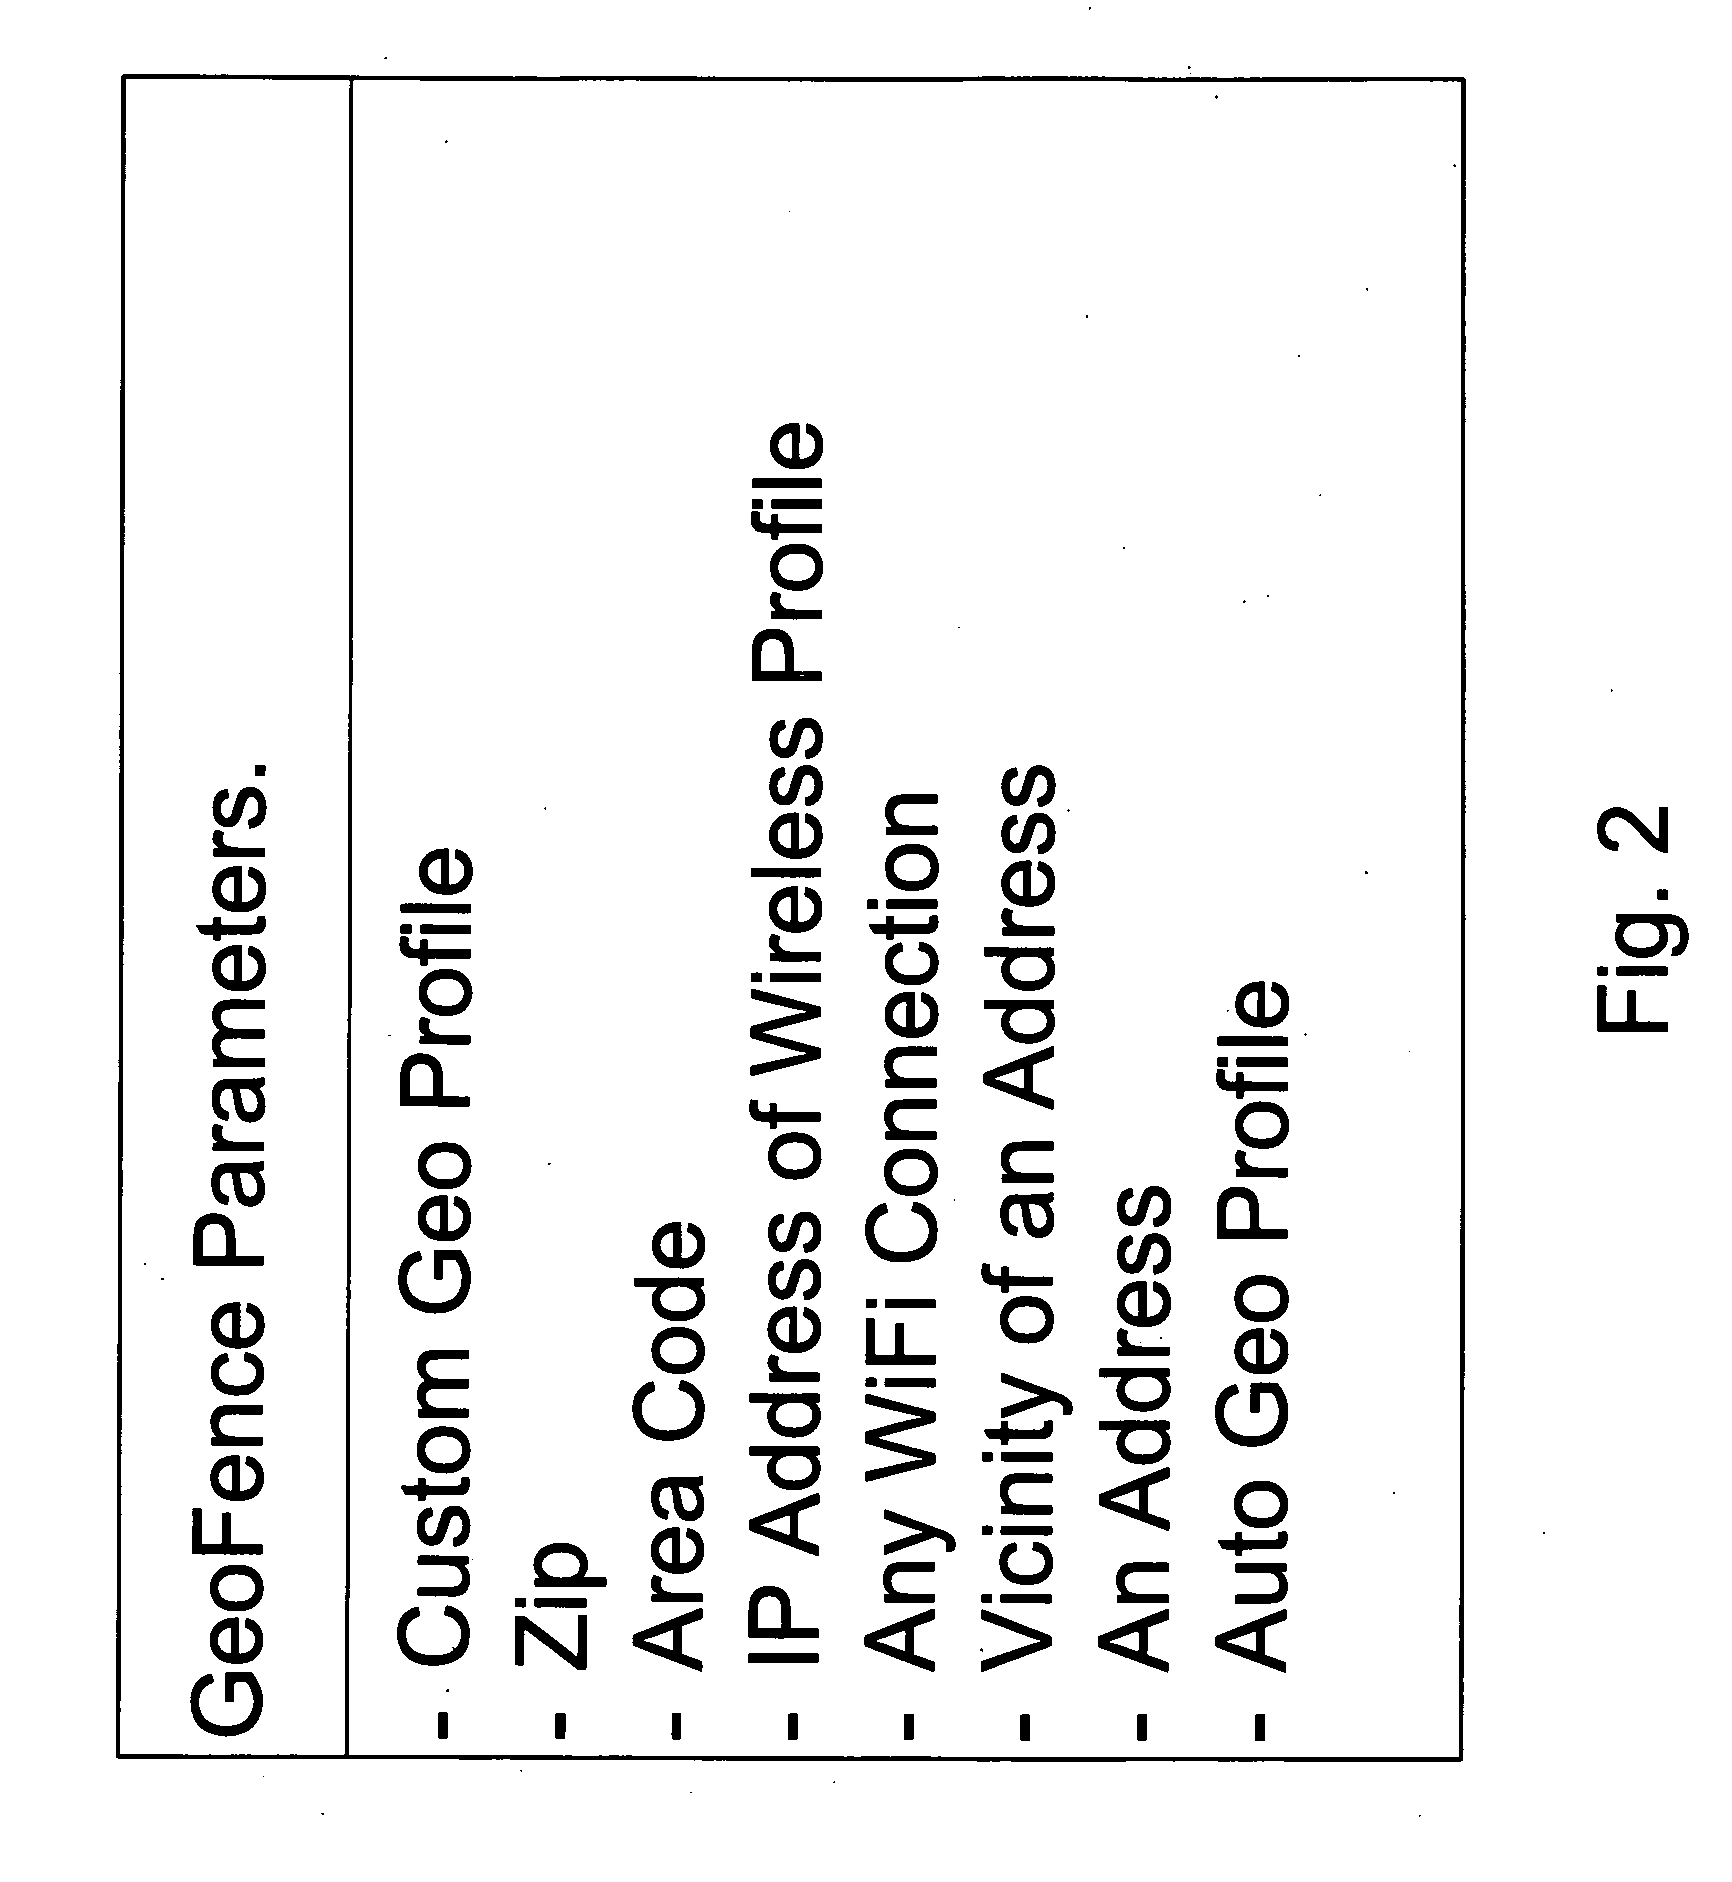 Use of geofences for location-based activation and control of services